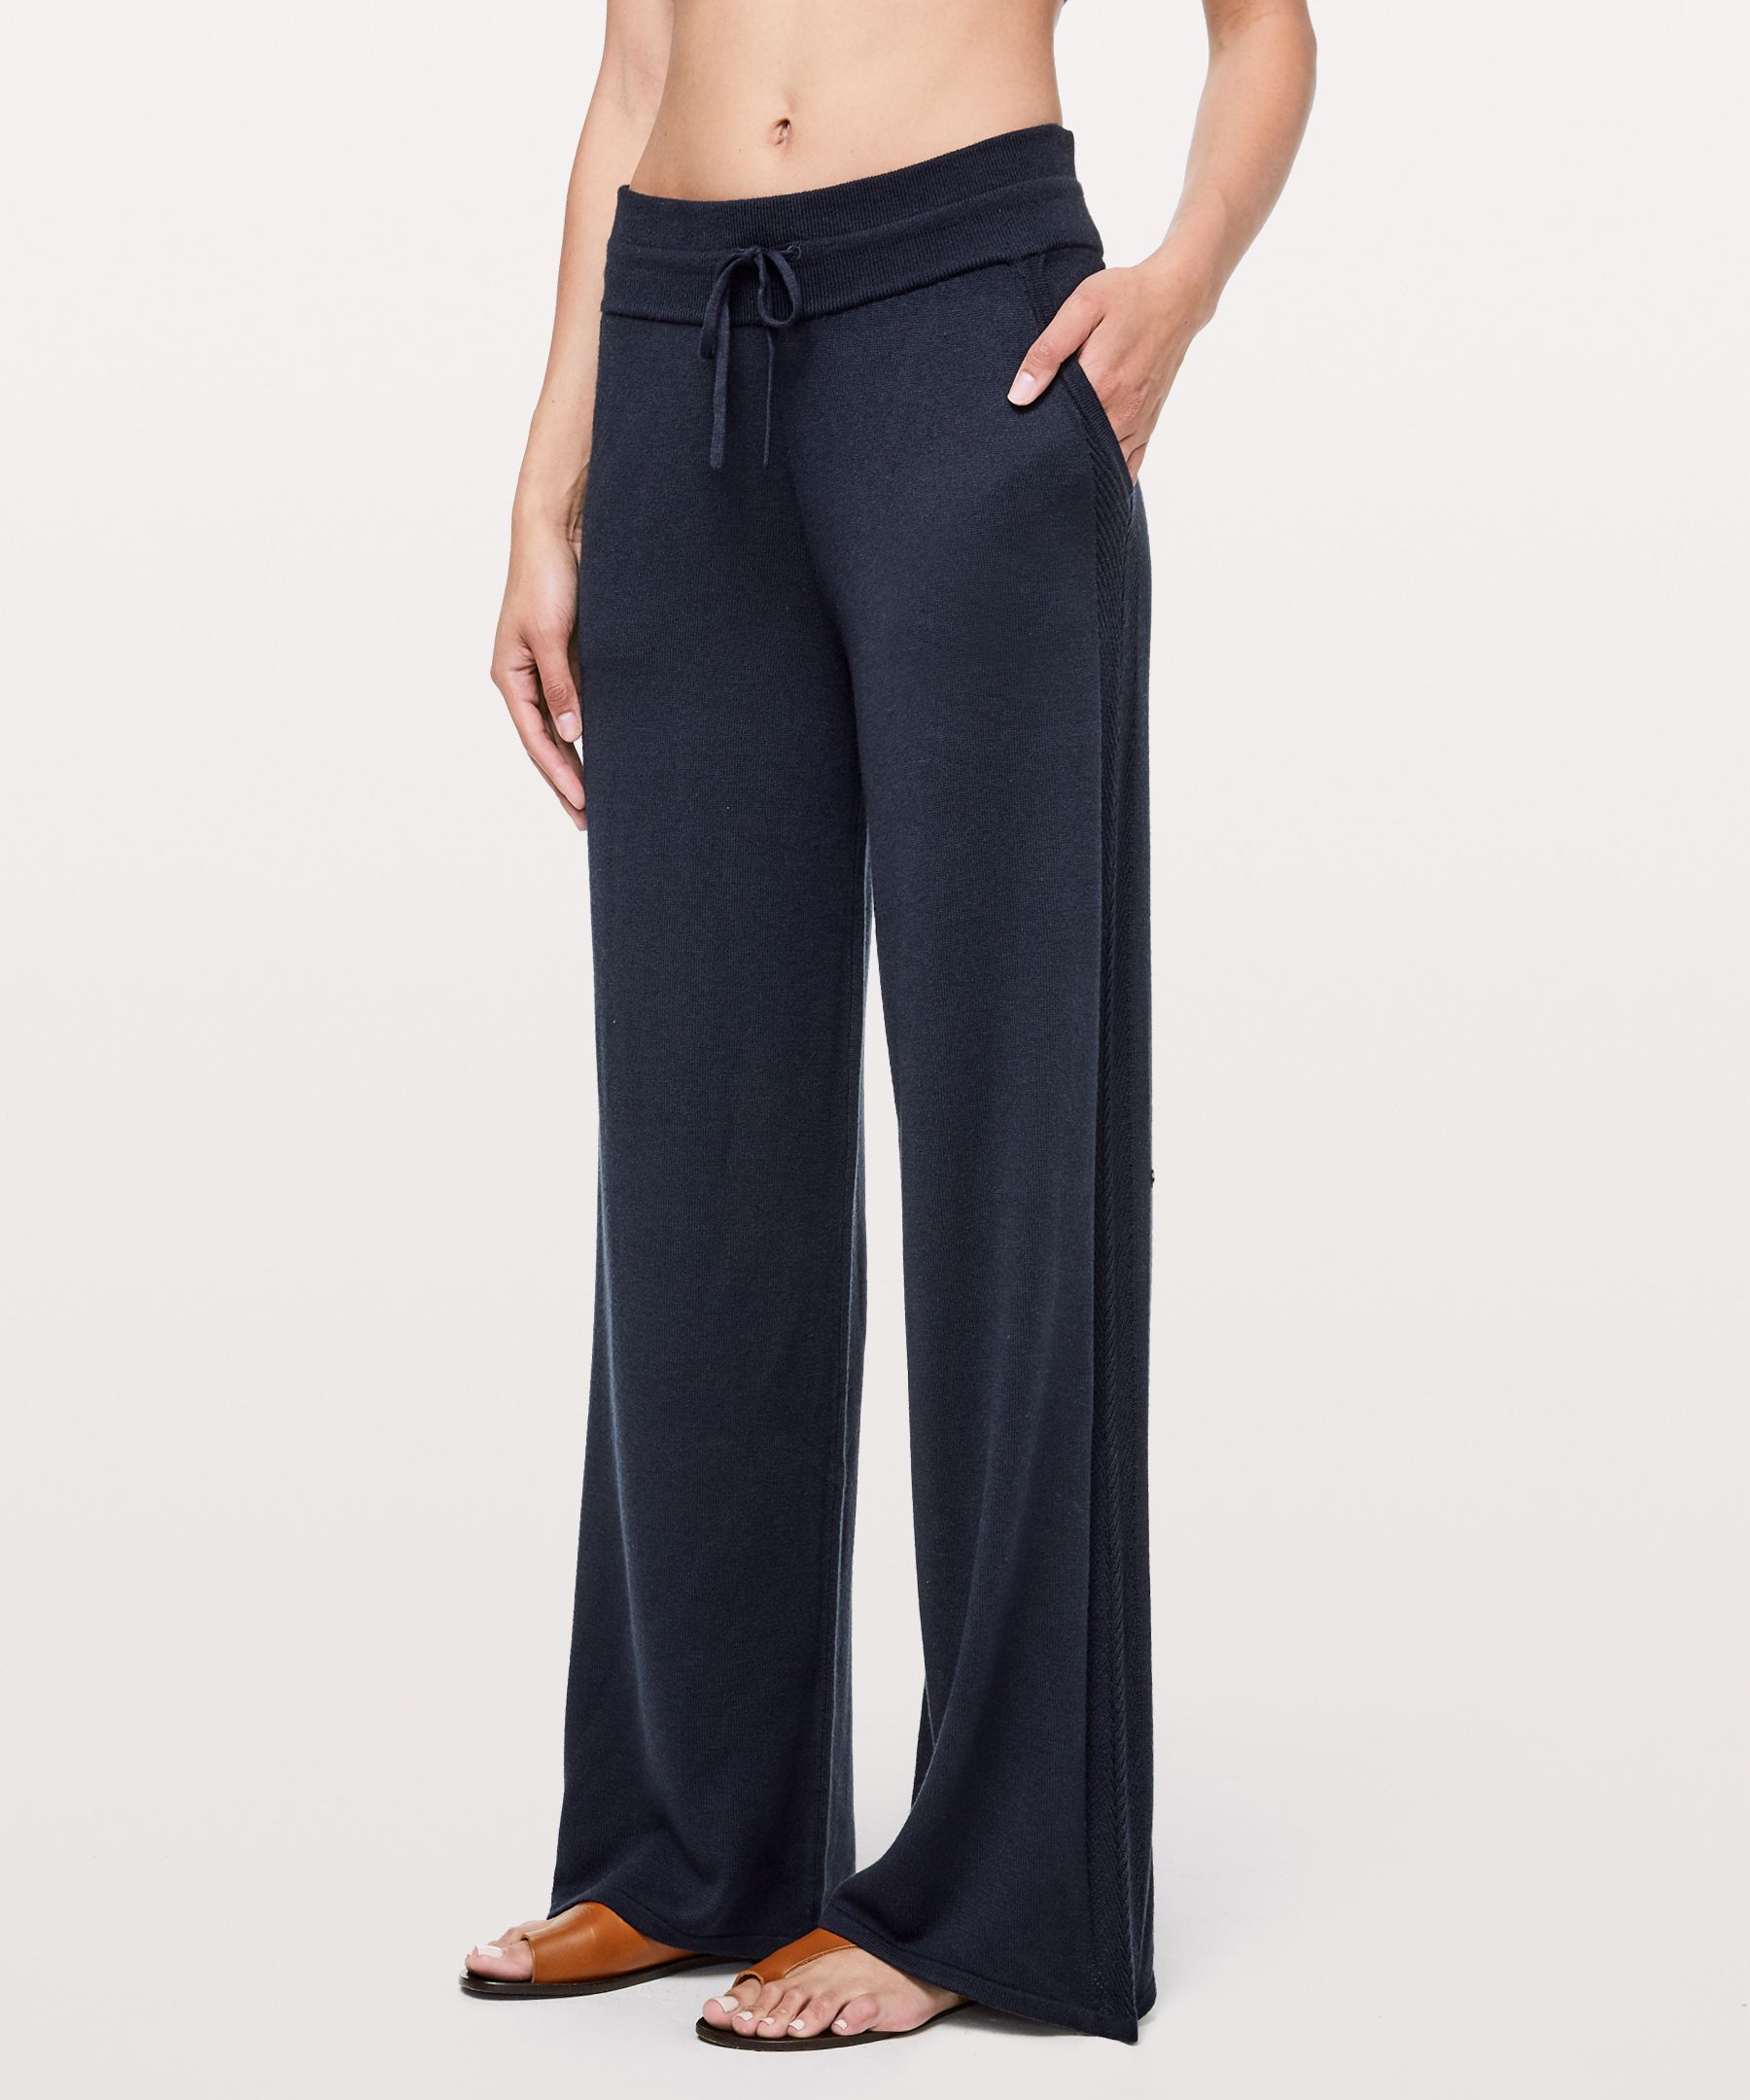 In the Comfort Zone Pant | Sweatpants 